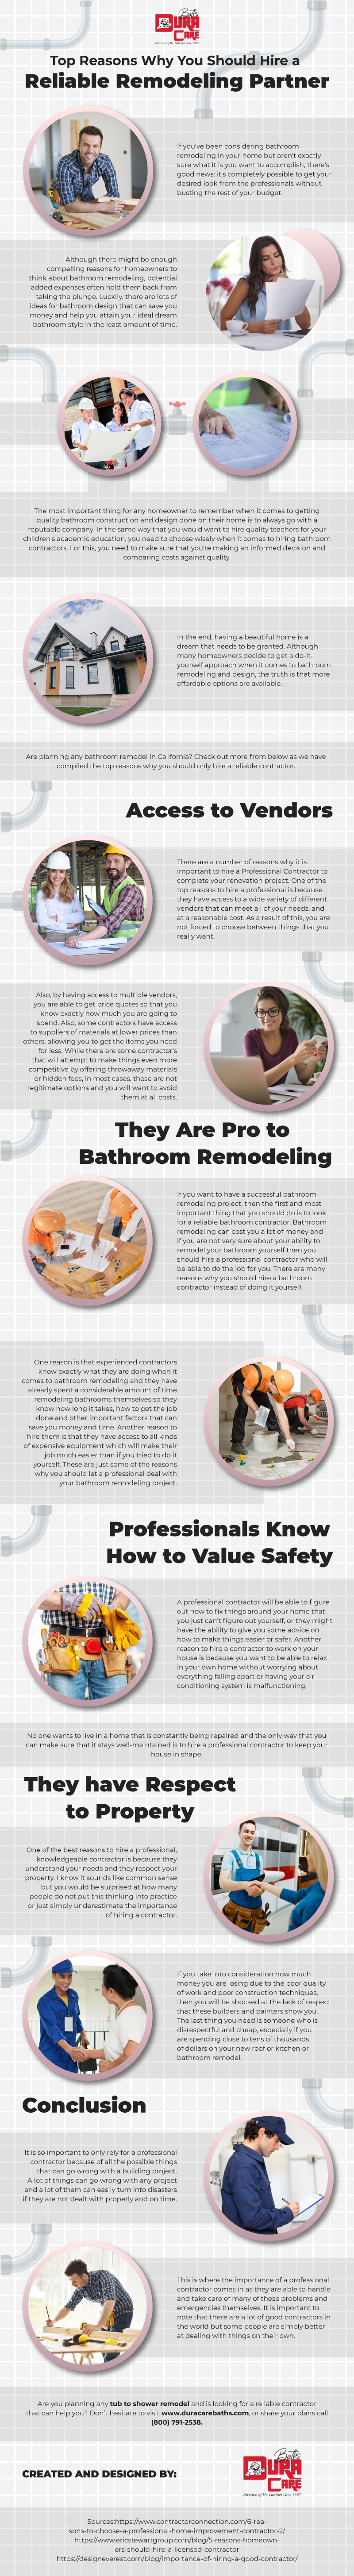 Top Reasons Why You Should Hire a Reliable Remodeling Partner